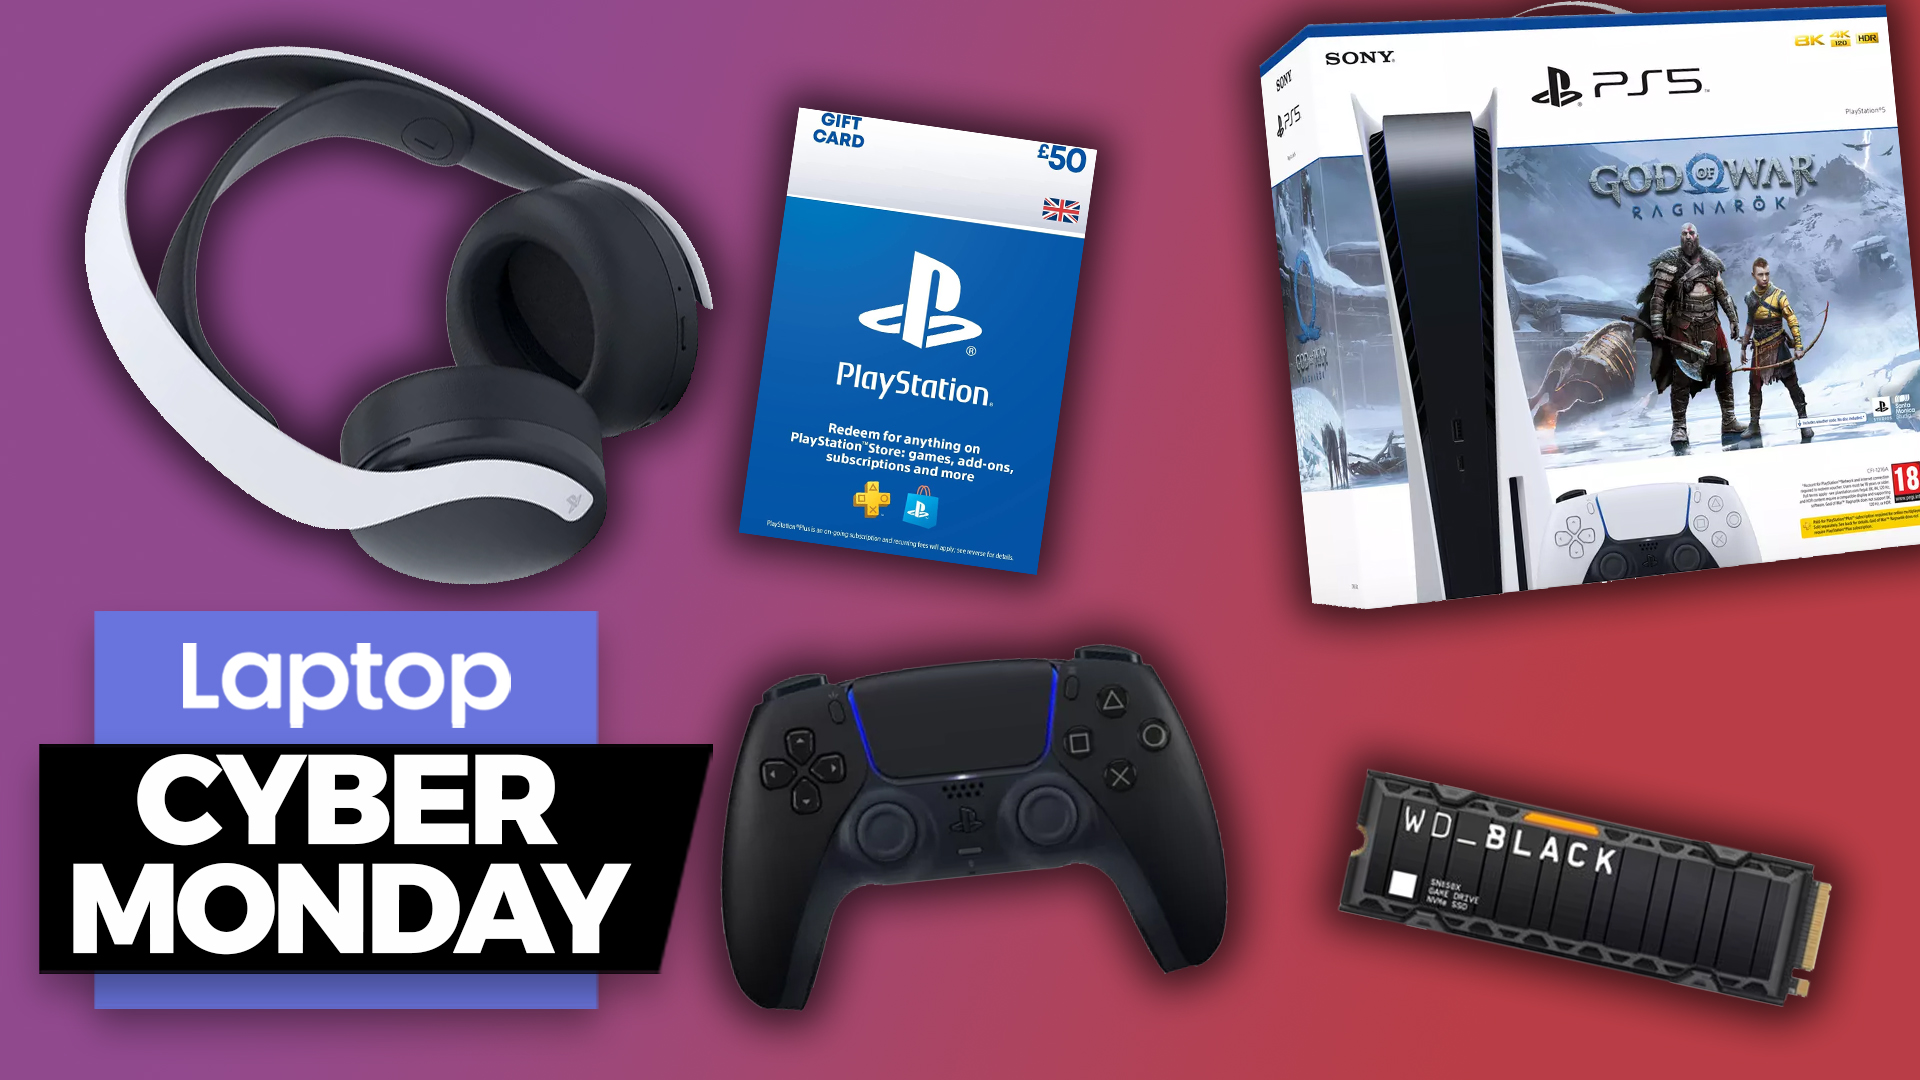 PS5 deals Cyber Monday UK LIVE: Where to buy the PS5 disc edition